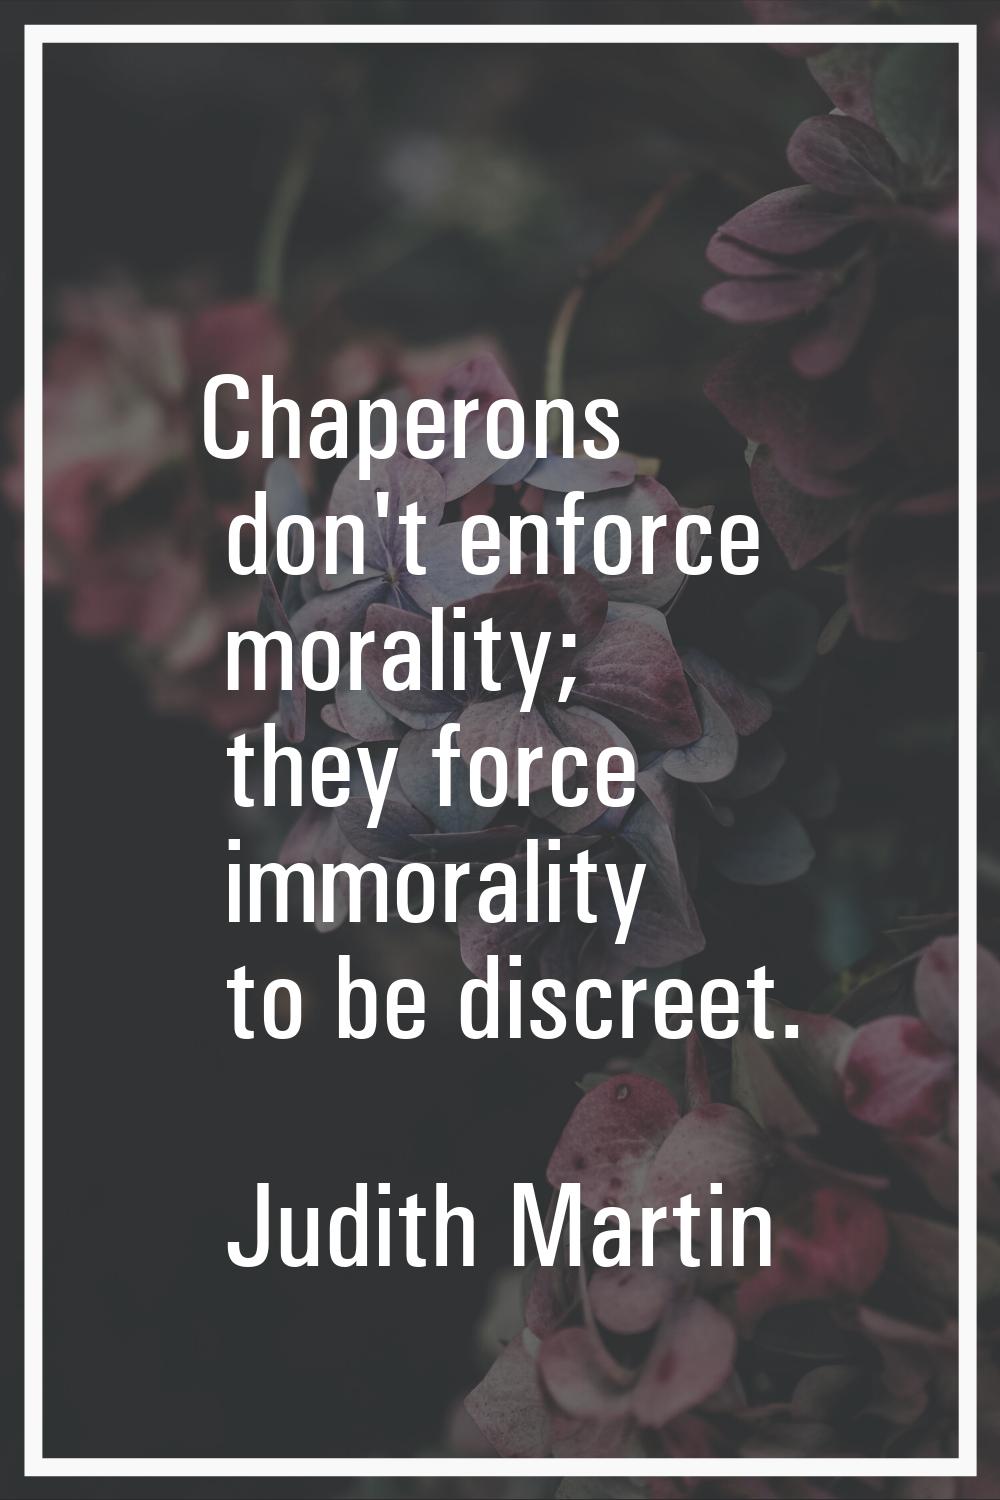 Chaperons don't enforce morality; they force immorality to be discreet.